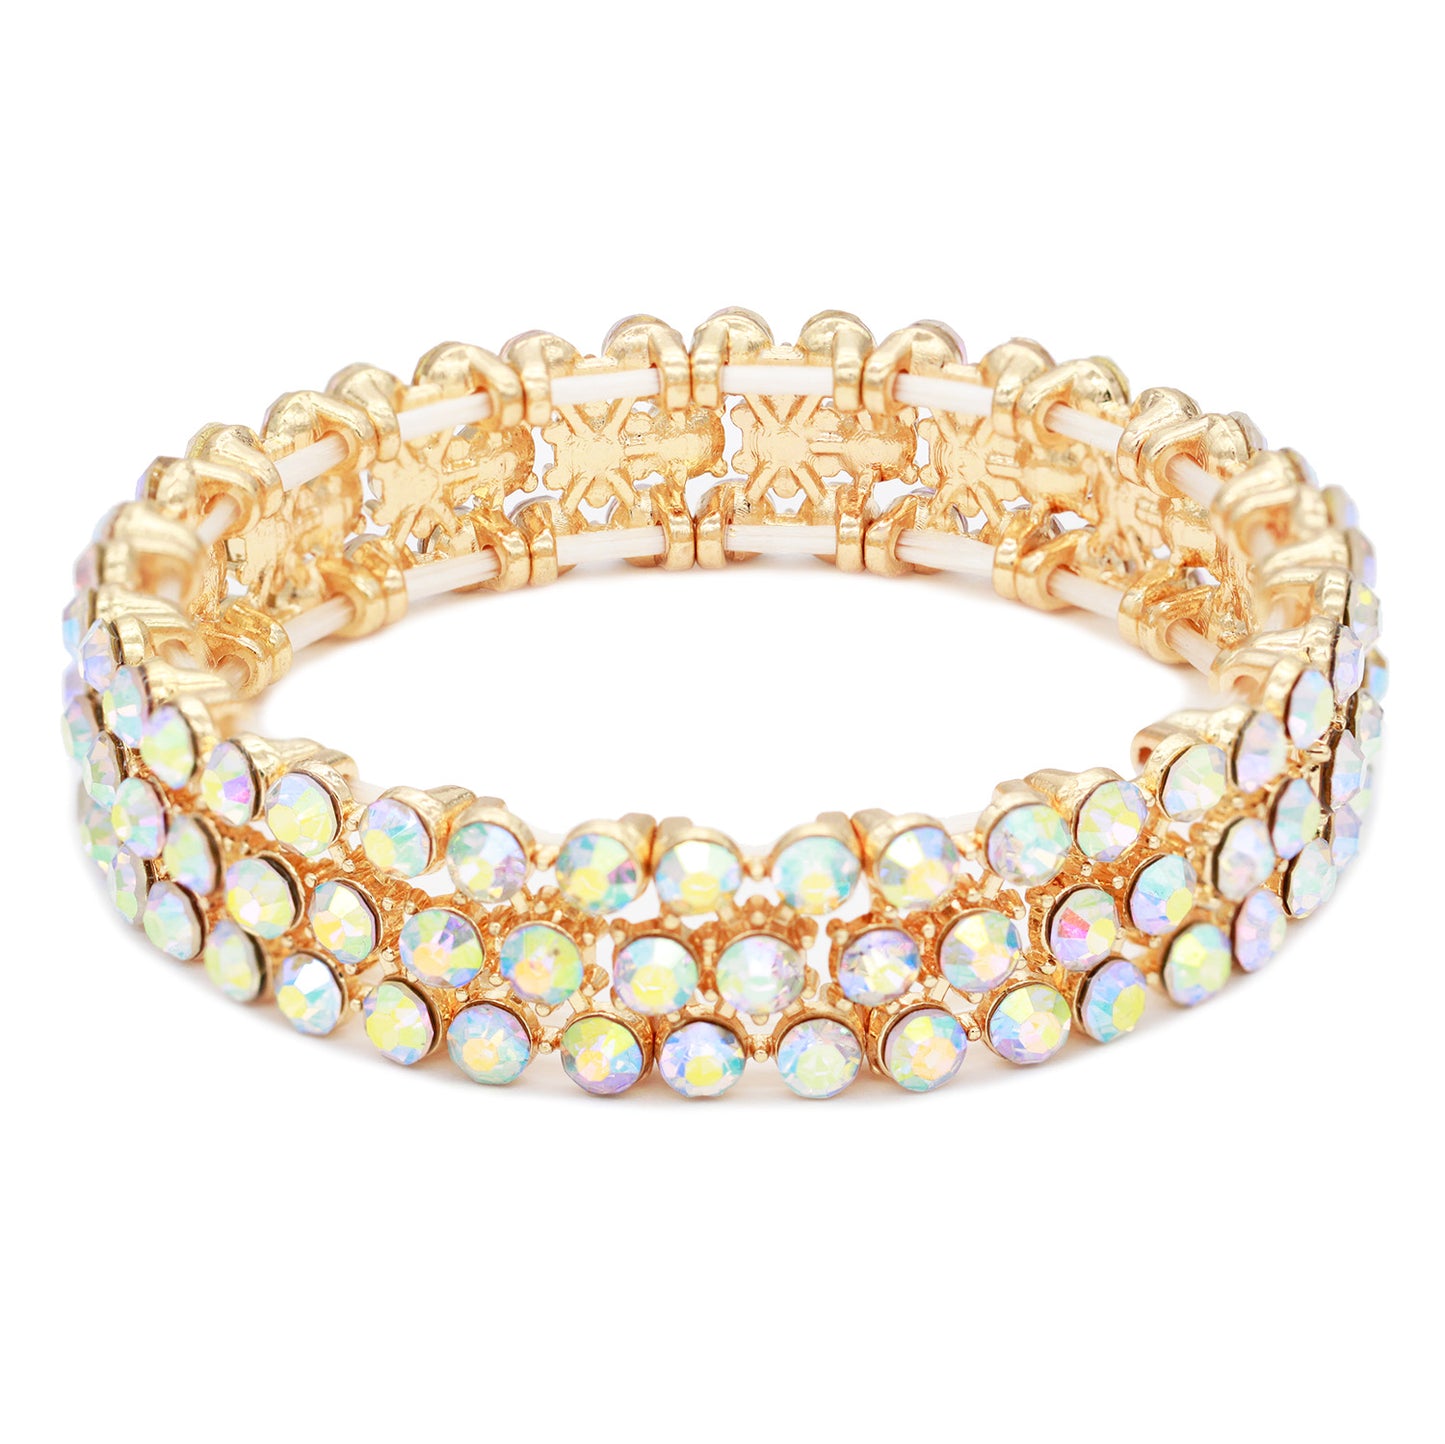 Lavencious Round Shape Rhinestones Thin 3 Rows Elastic Stretch Bracelet Party Jewelry for Women 7"(Gold AB)